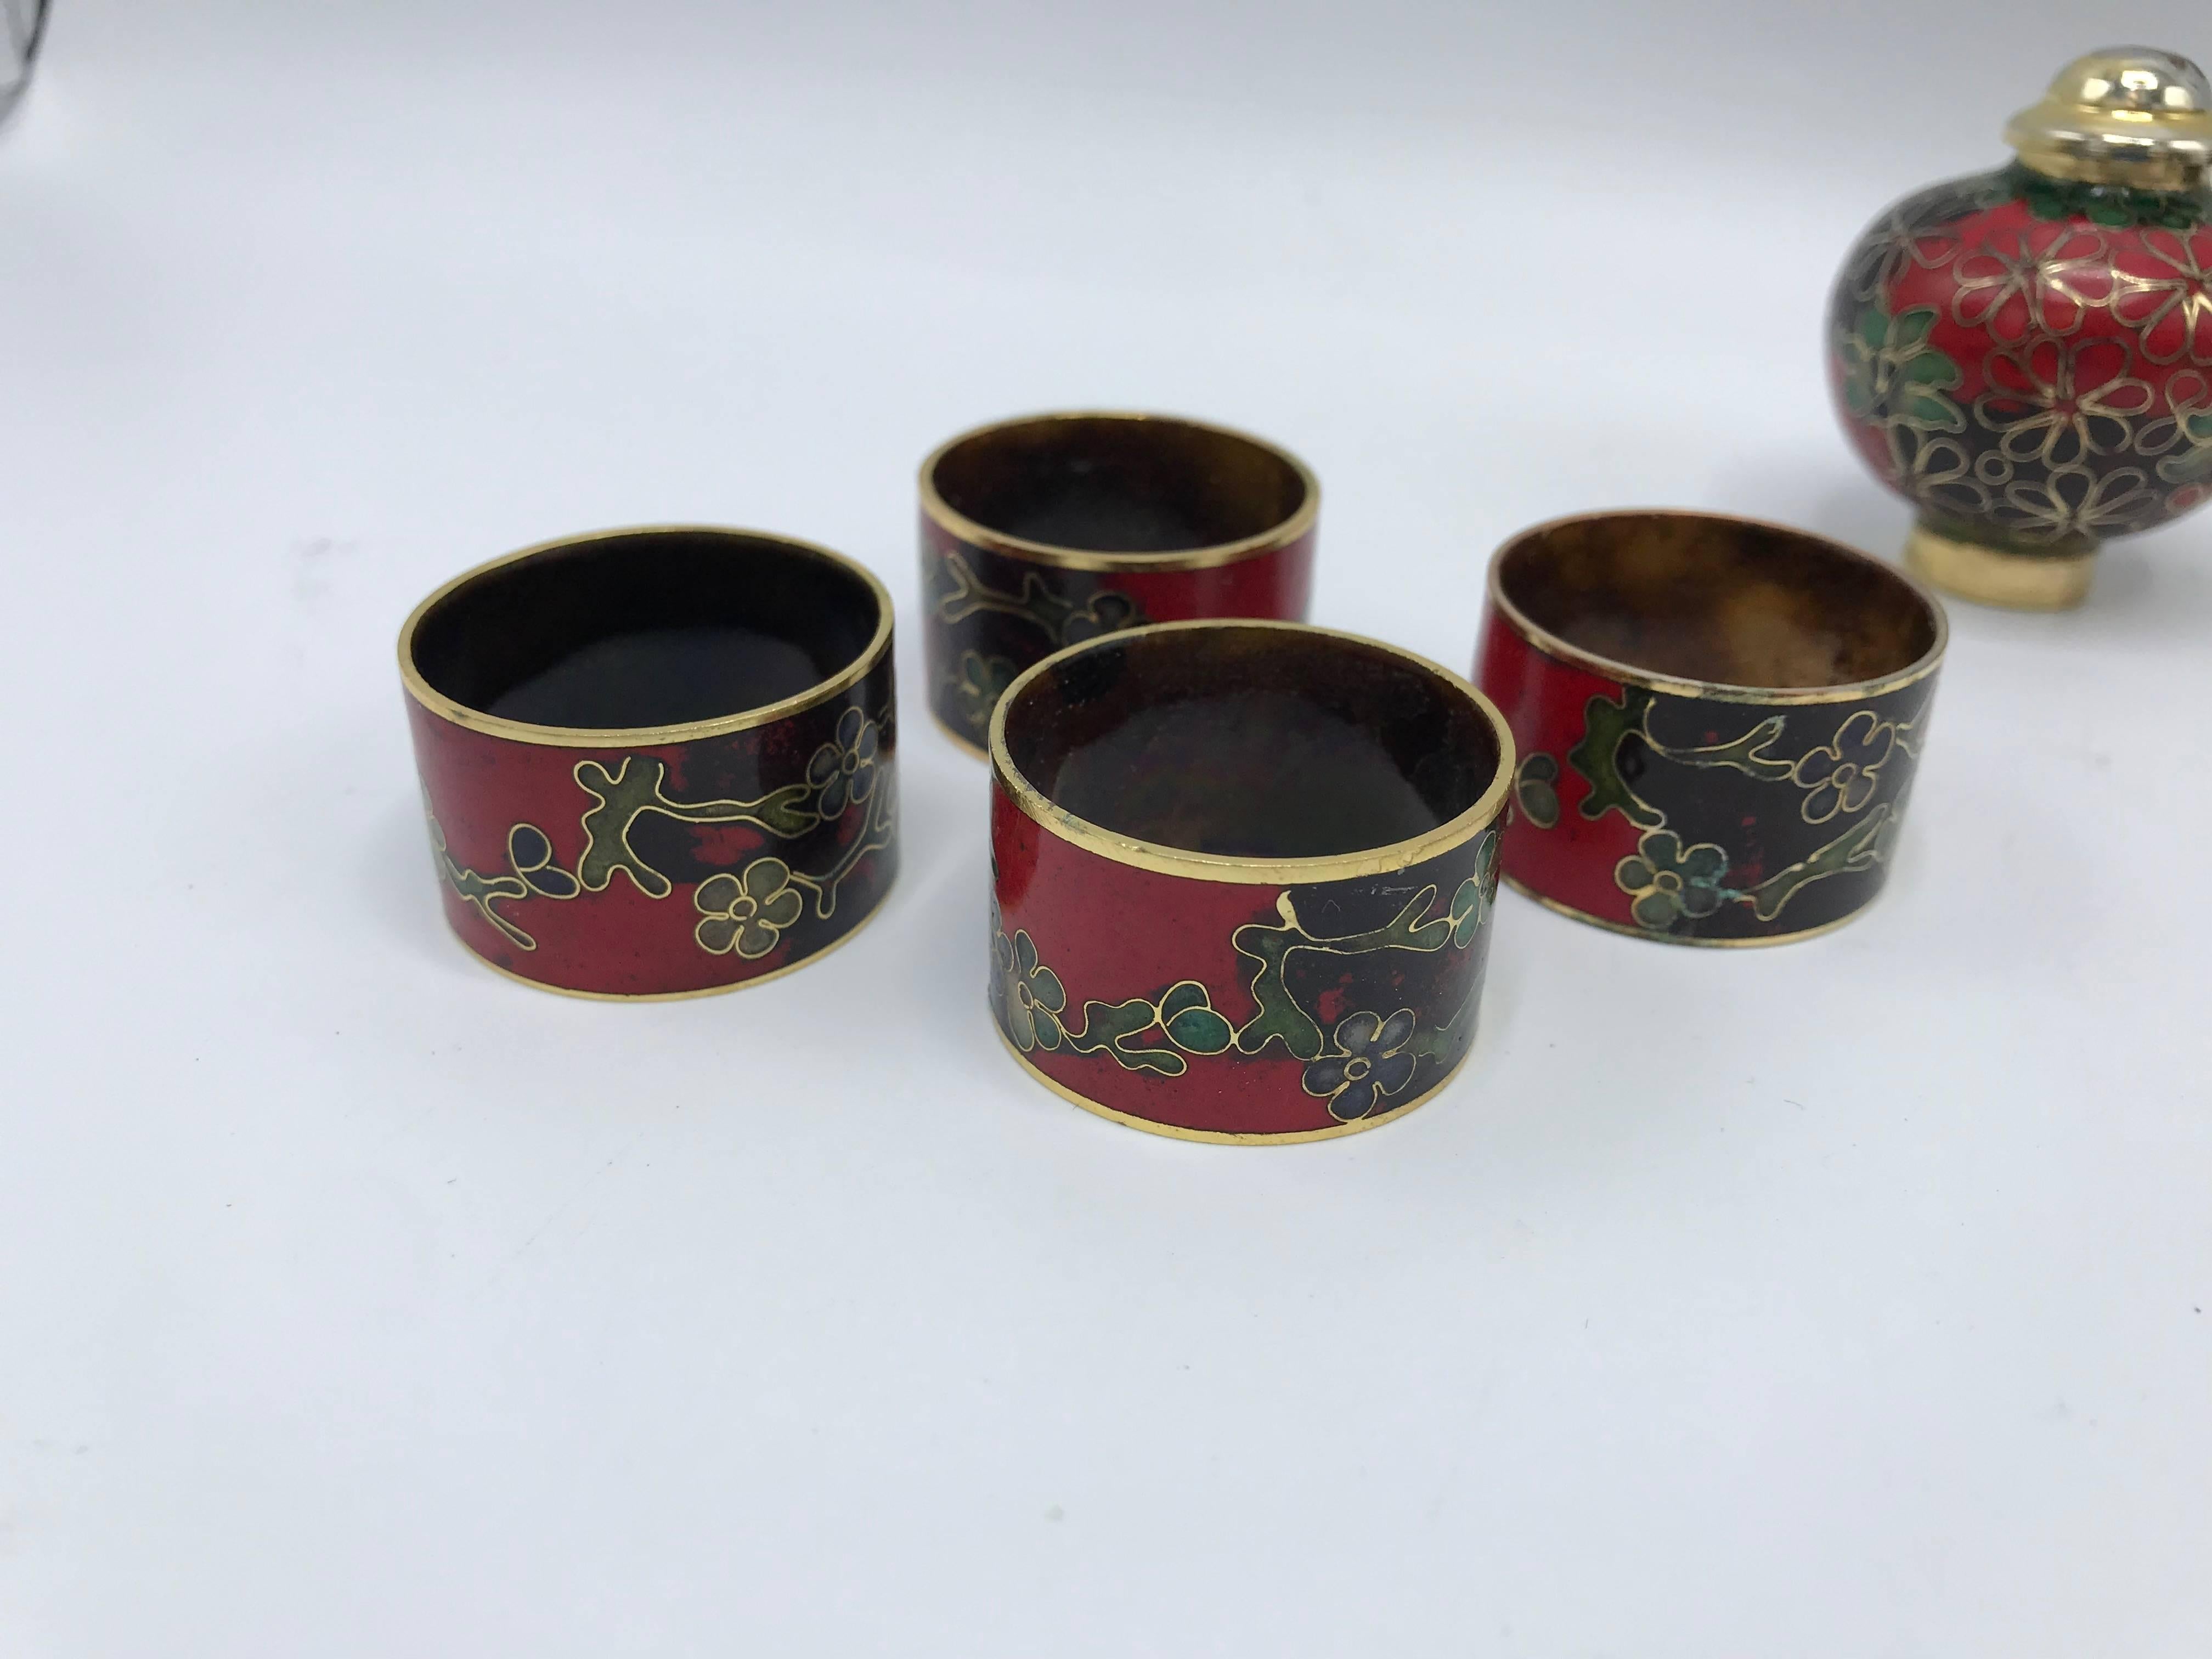 Offered is an immaculate, 1950s black and red cloisonné serving set with an ornate floral motif. The set of 11 includes; 8 napkin rings, a pair of salt and pepper shakers, and a toothpick holder. Fabulous touch of chinoiserie-chic to any table